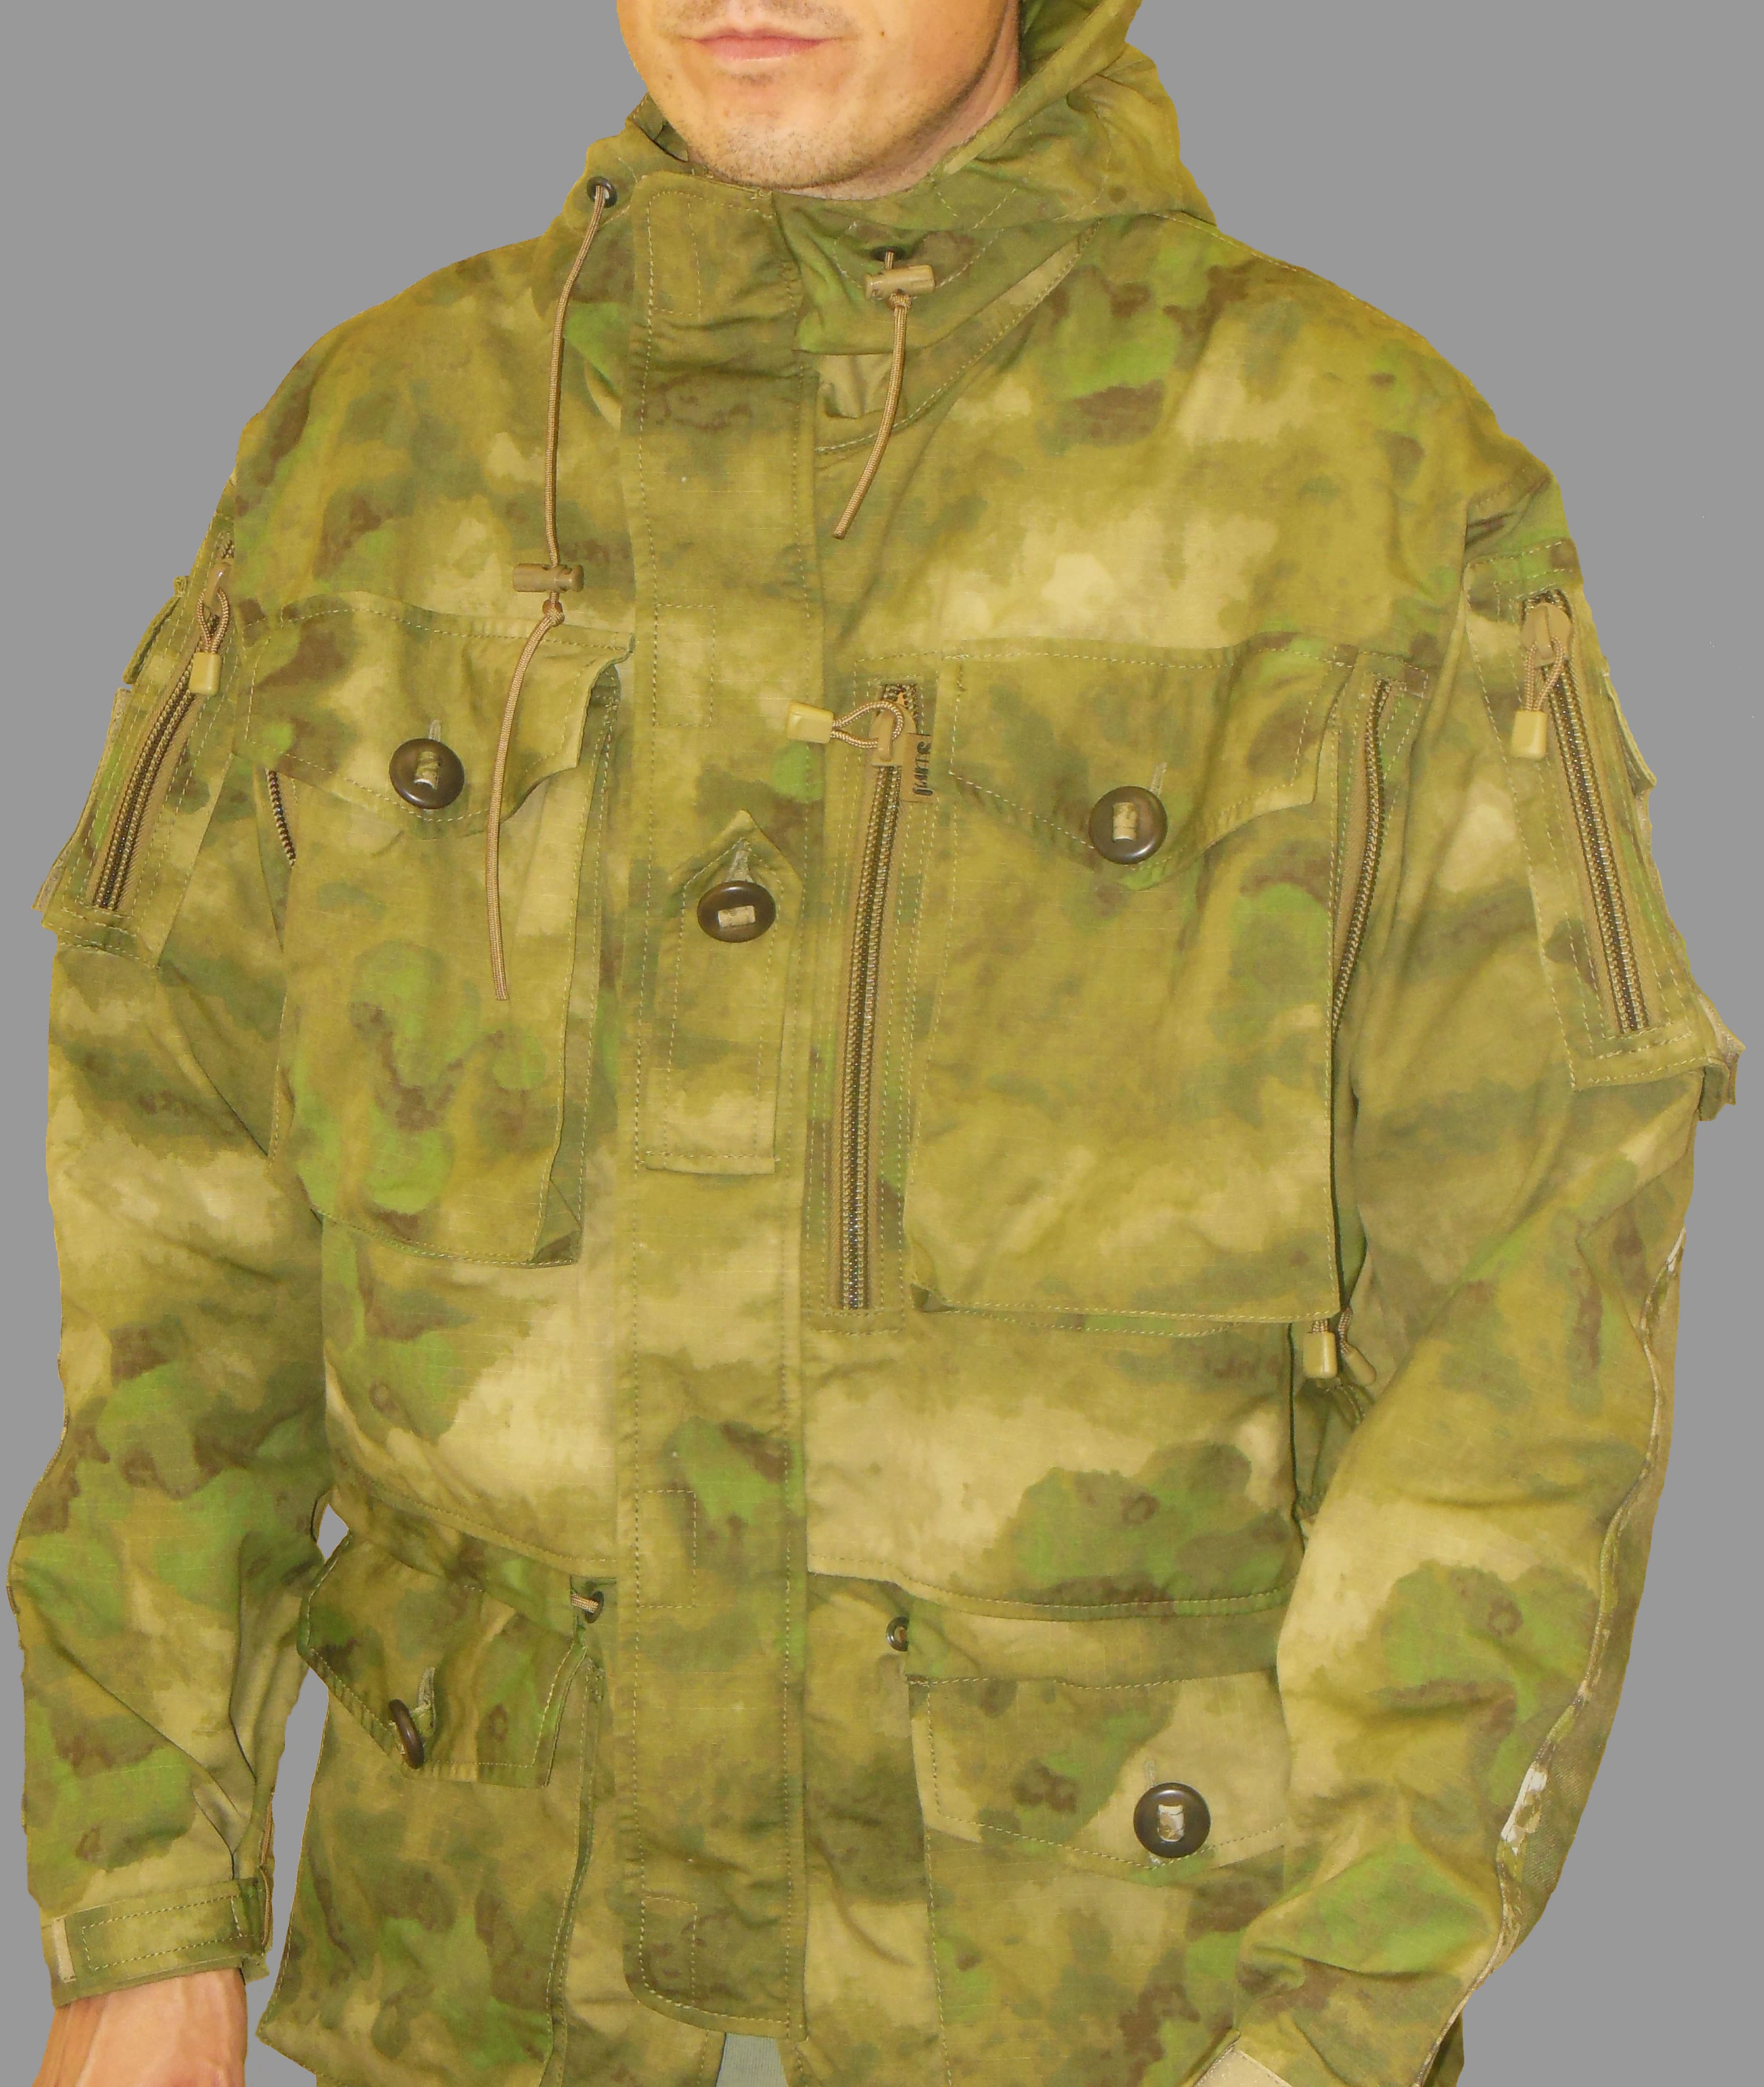 A-TACS FG Smock Front 66 - Soldier Systems Daily